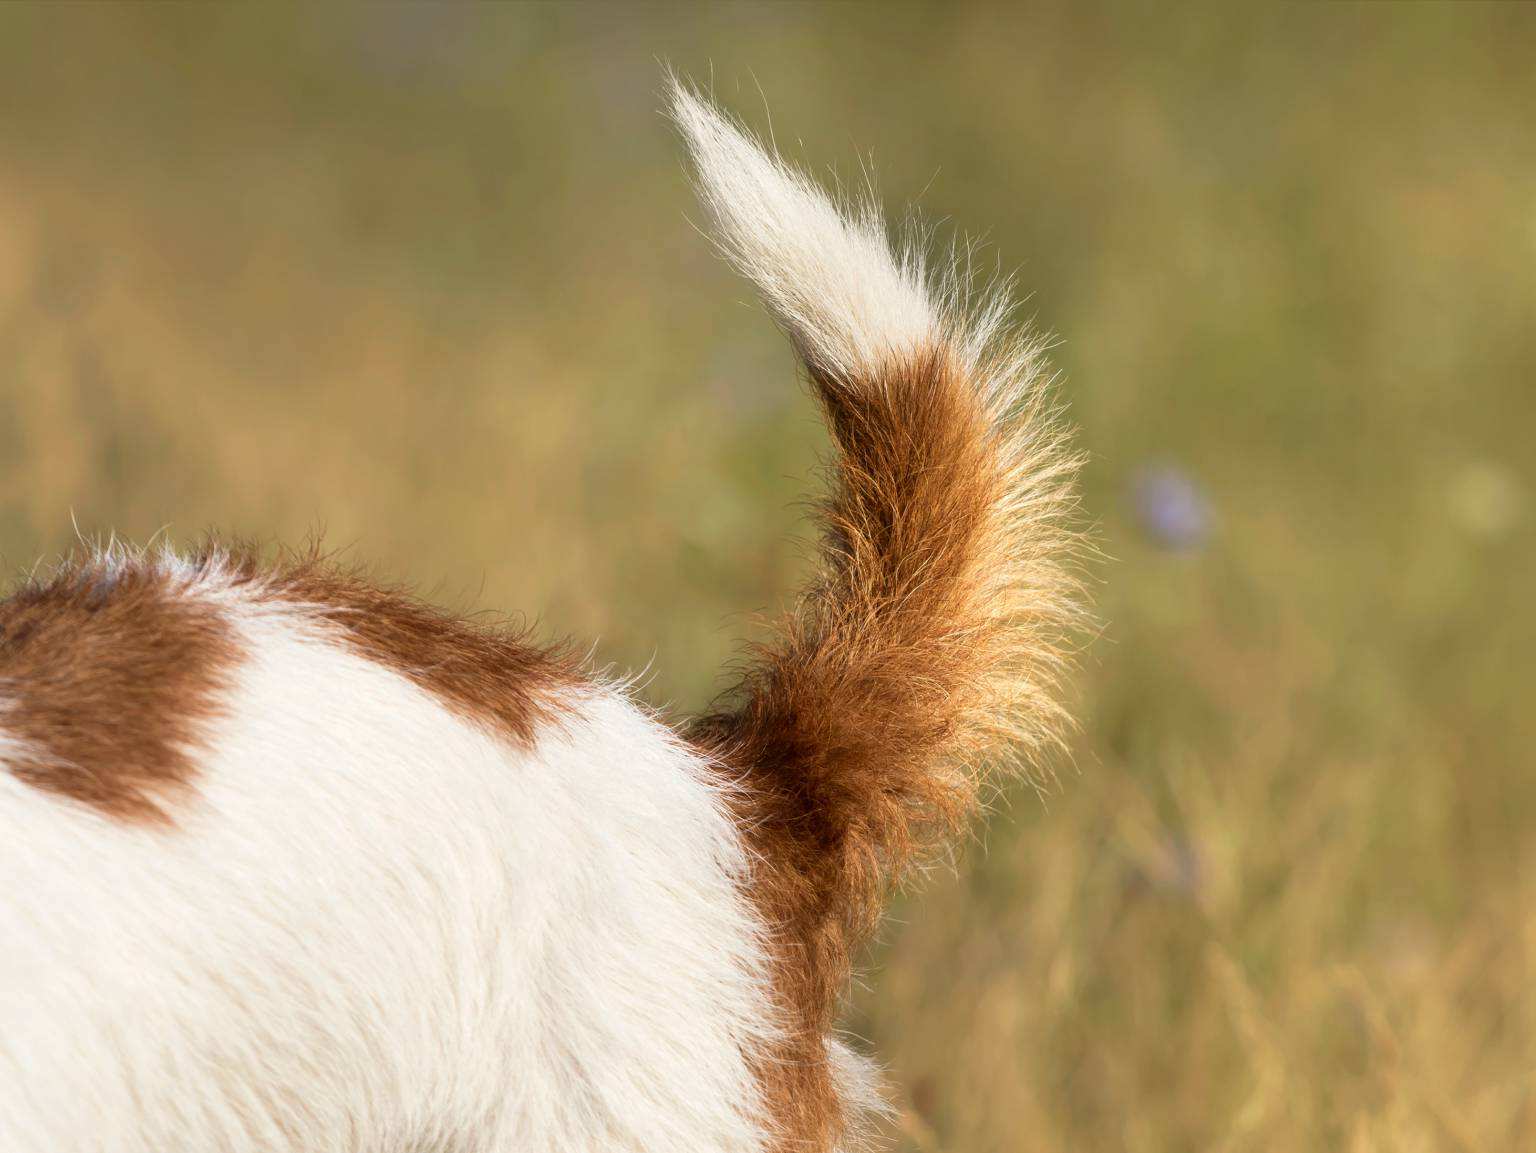 A dog's furry tail